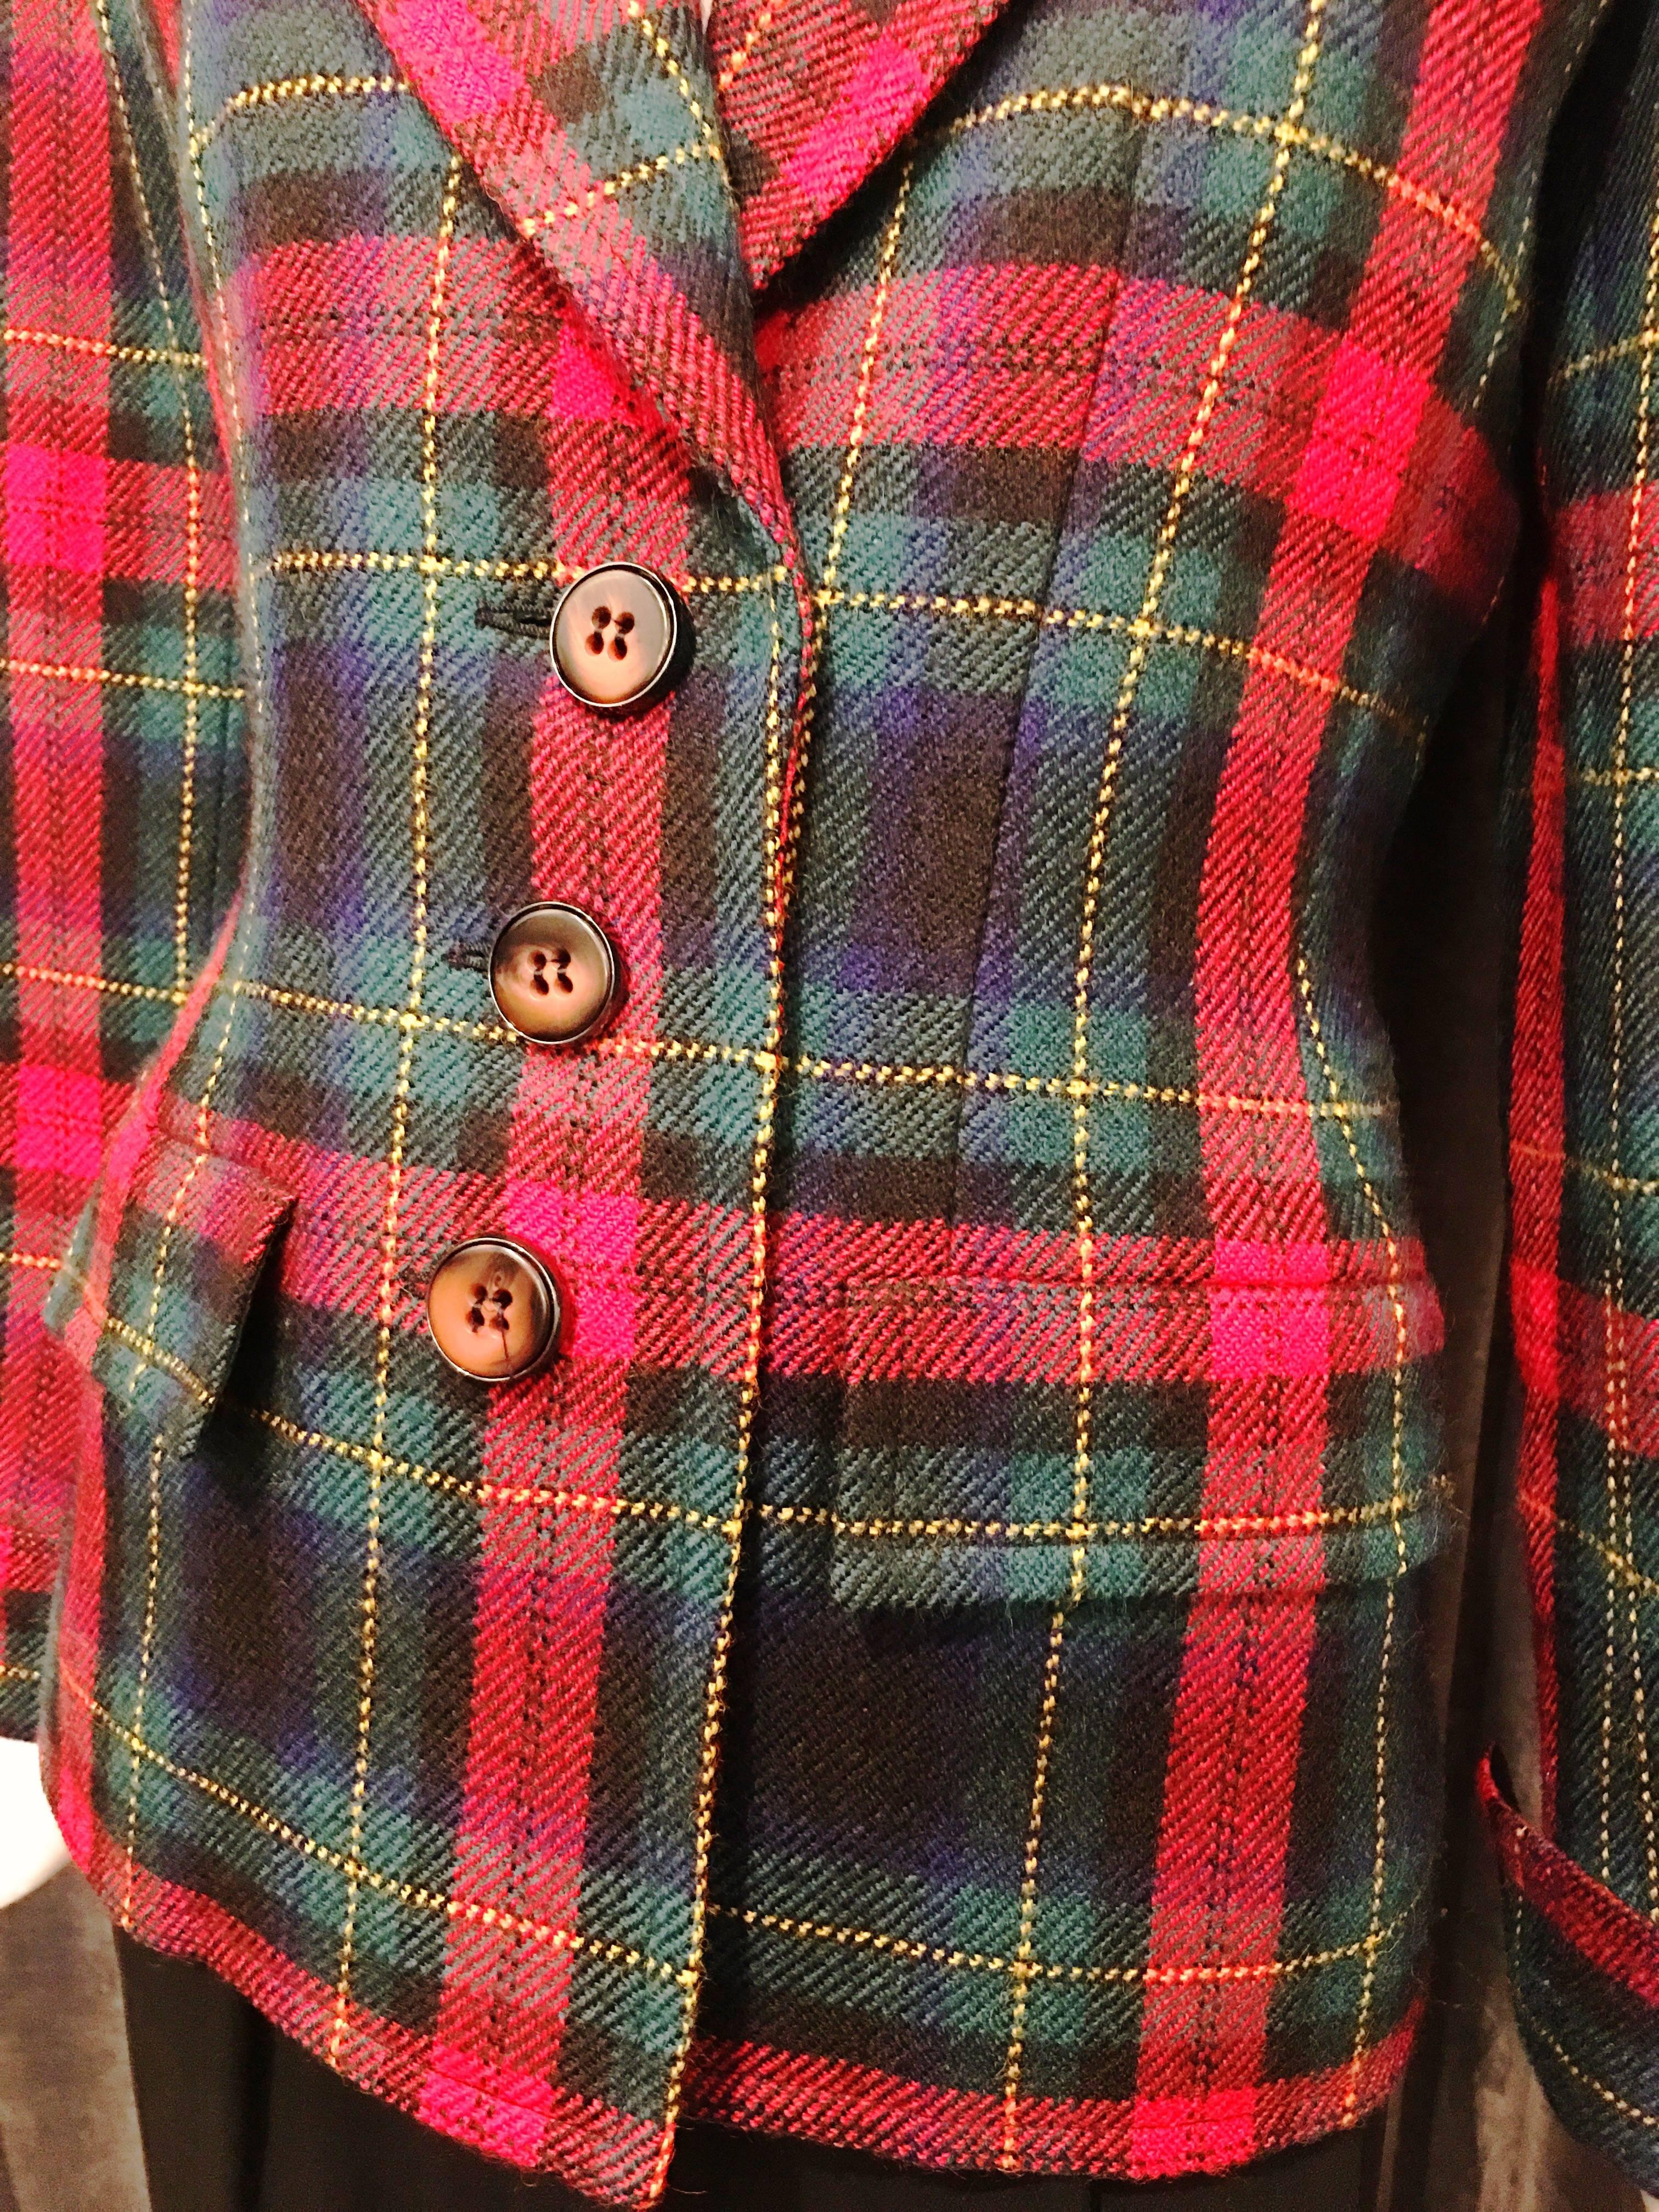 1980s Saint Laurent Plaid Blazer In Excellent Condition For Sale In Brooklyn, NY